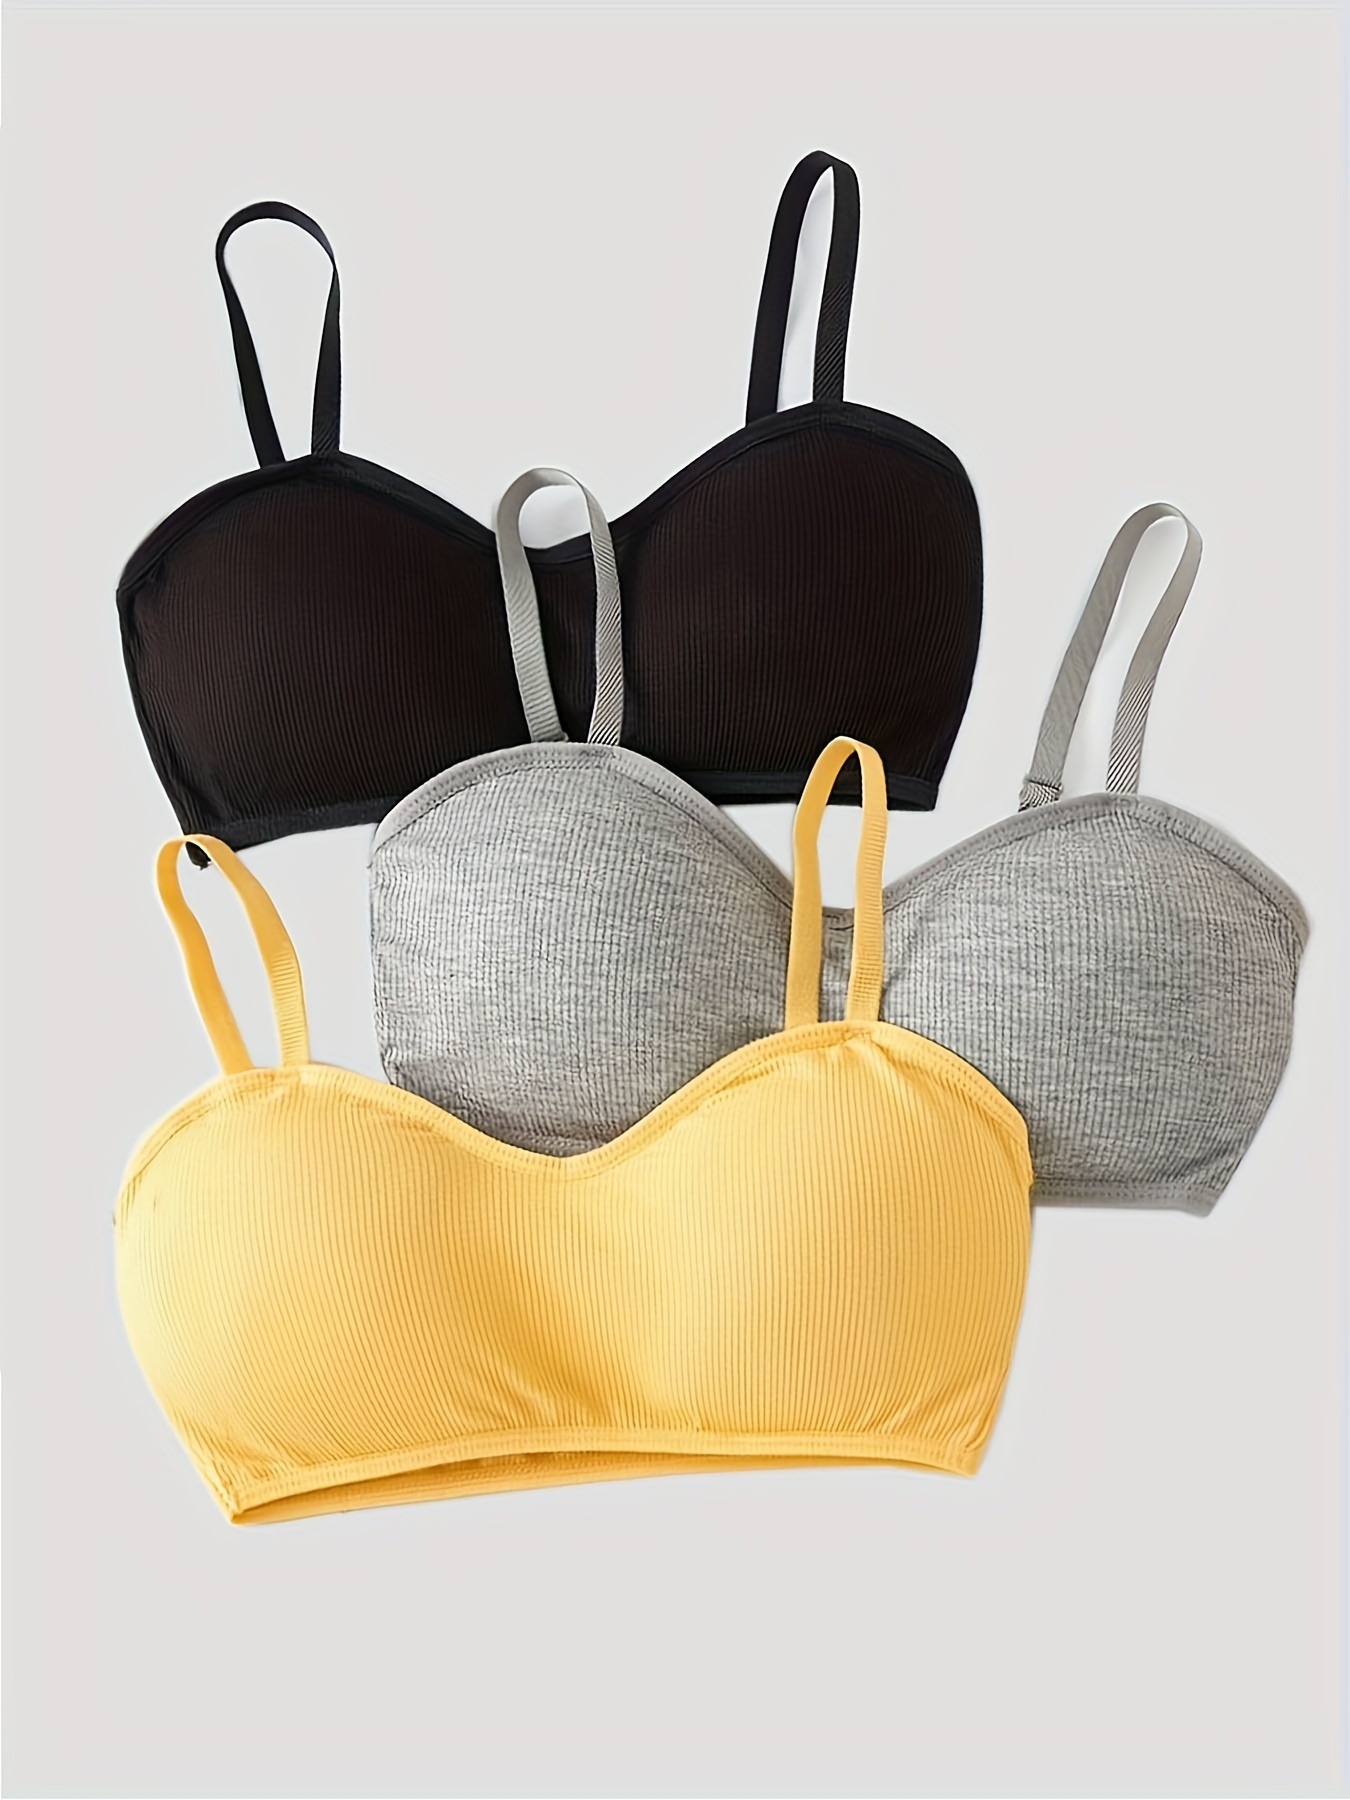 Sexy Simple Push Up Bra Front Button Candy Color A B Cup Women